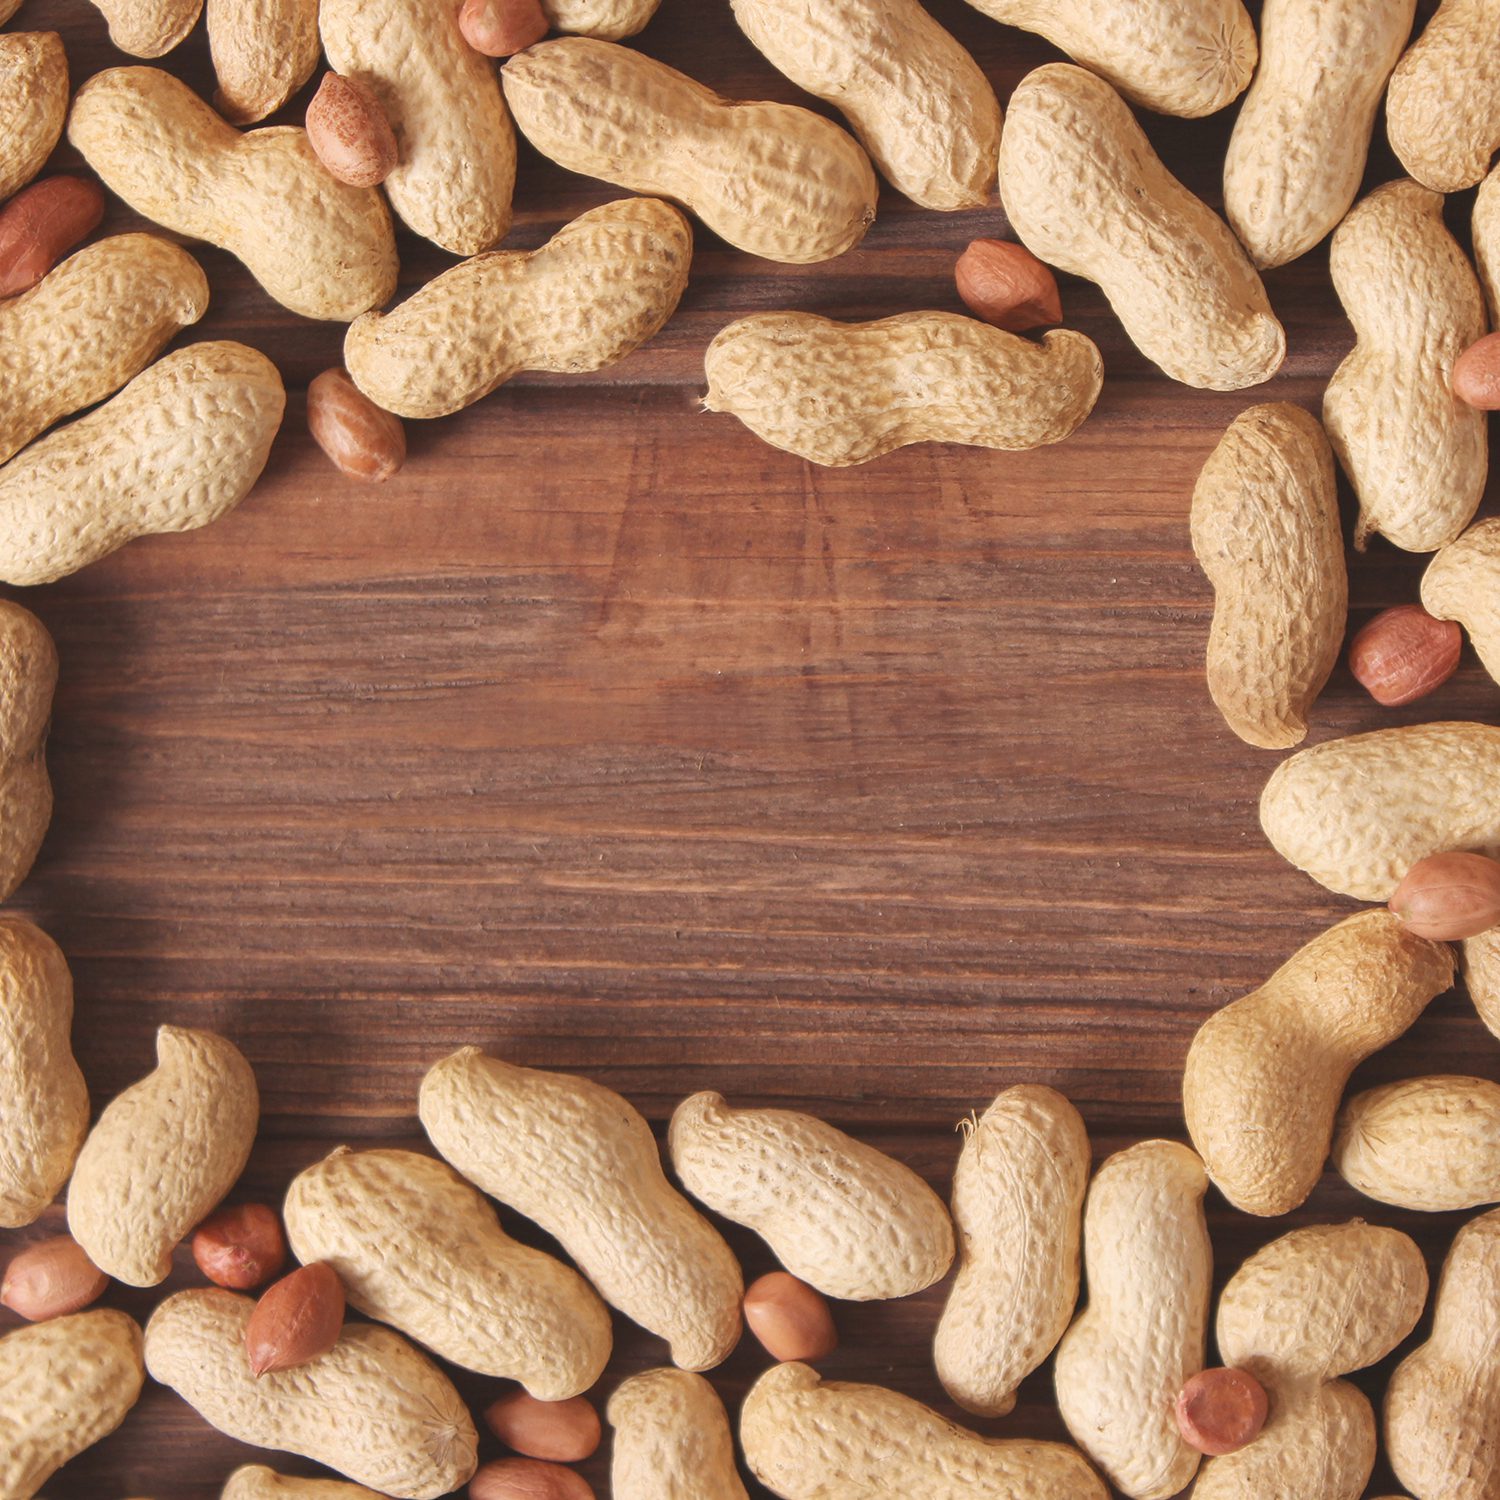 Natural Remedies for Peanut Allergies